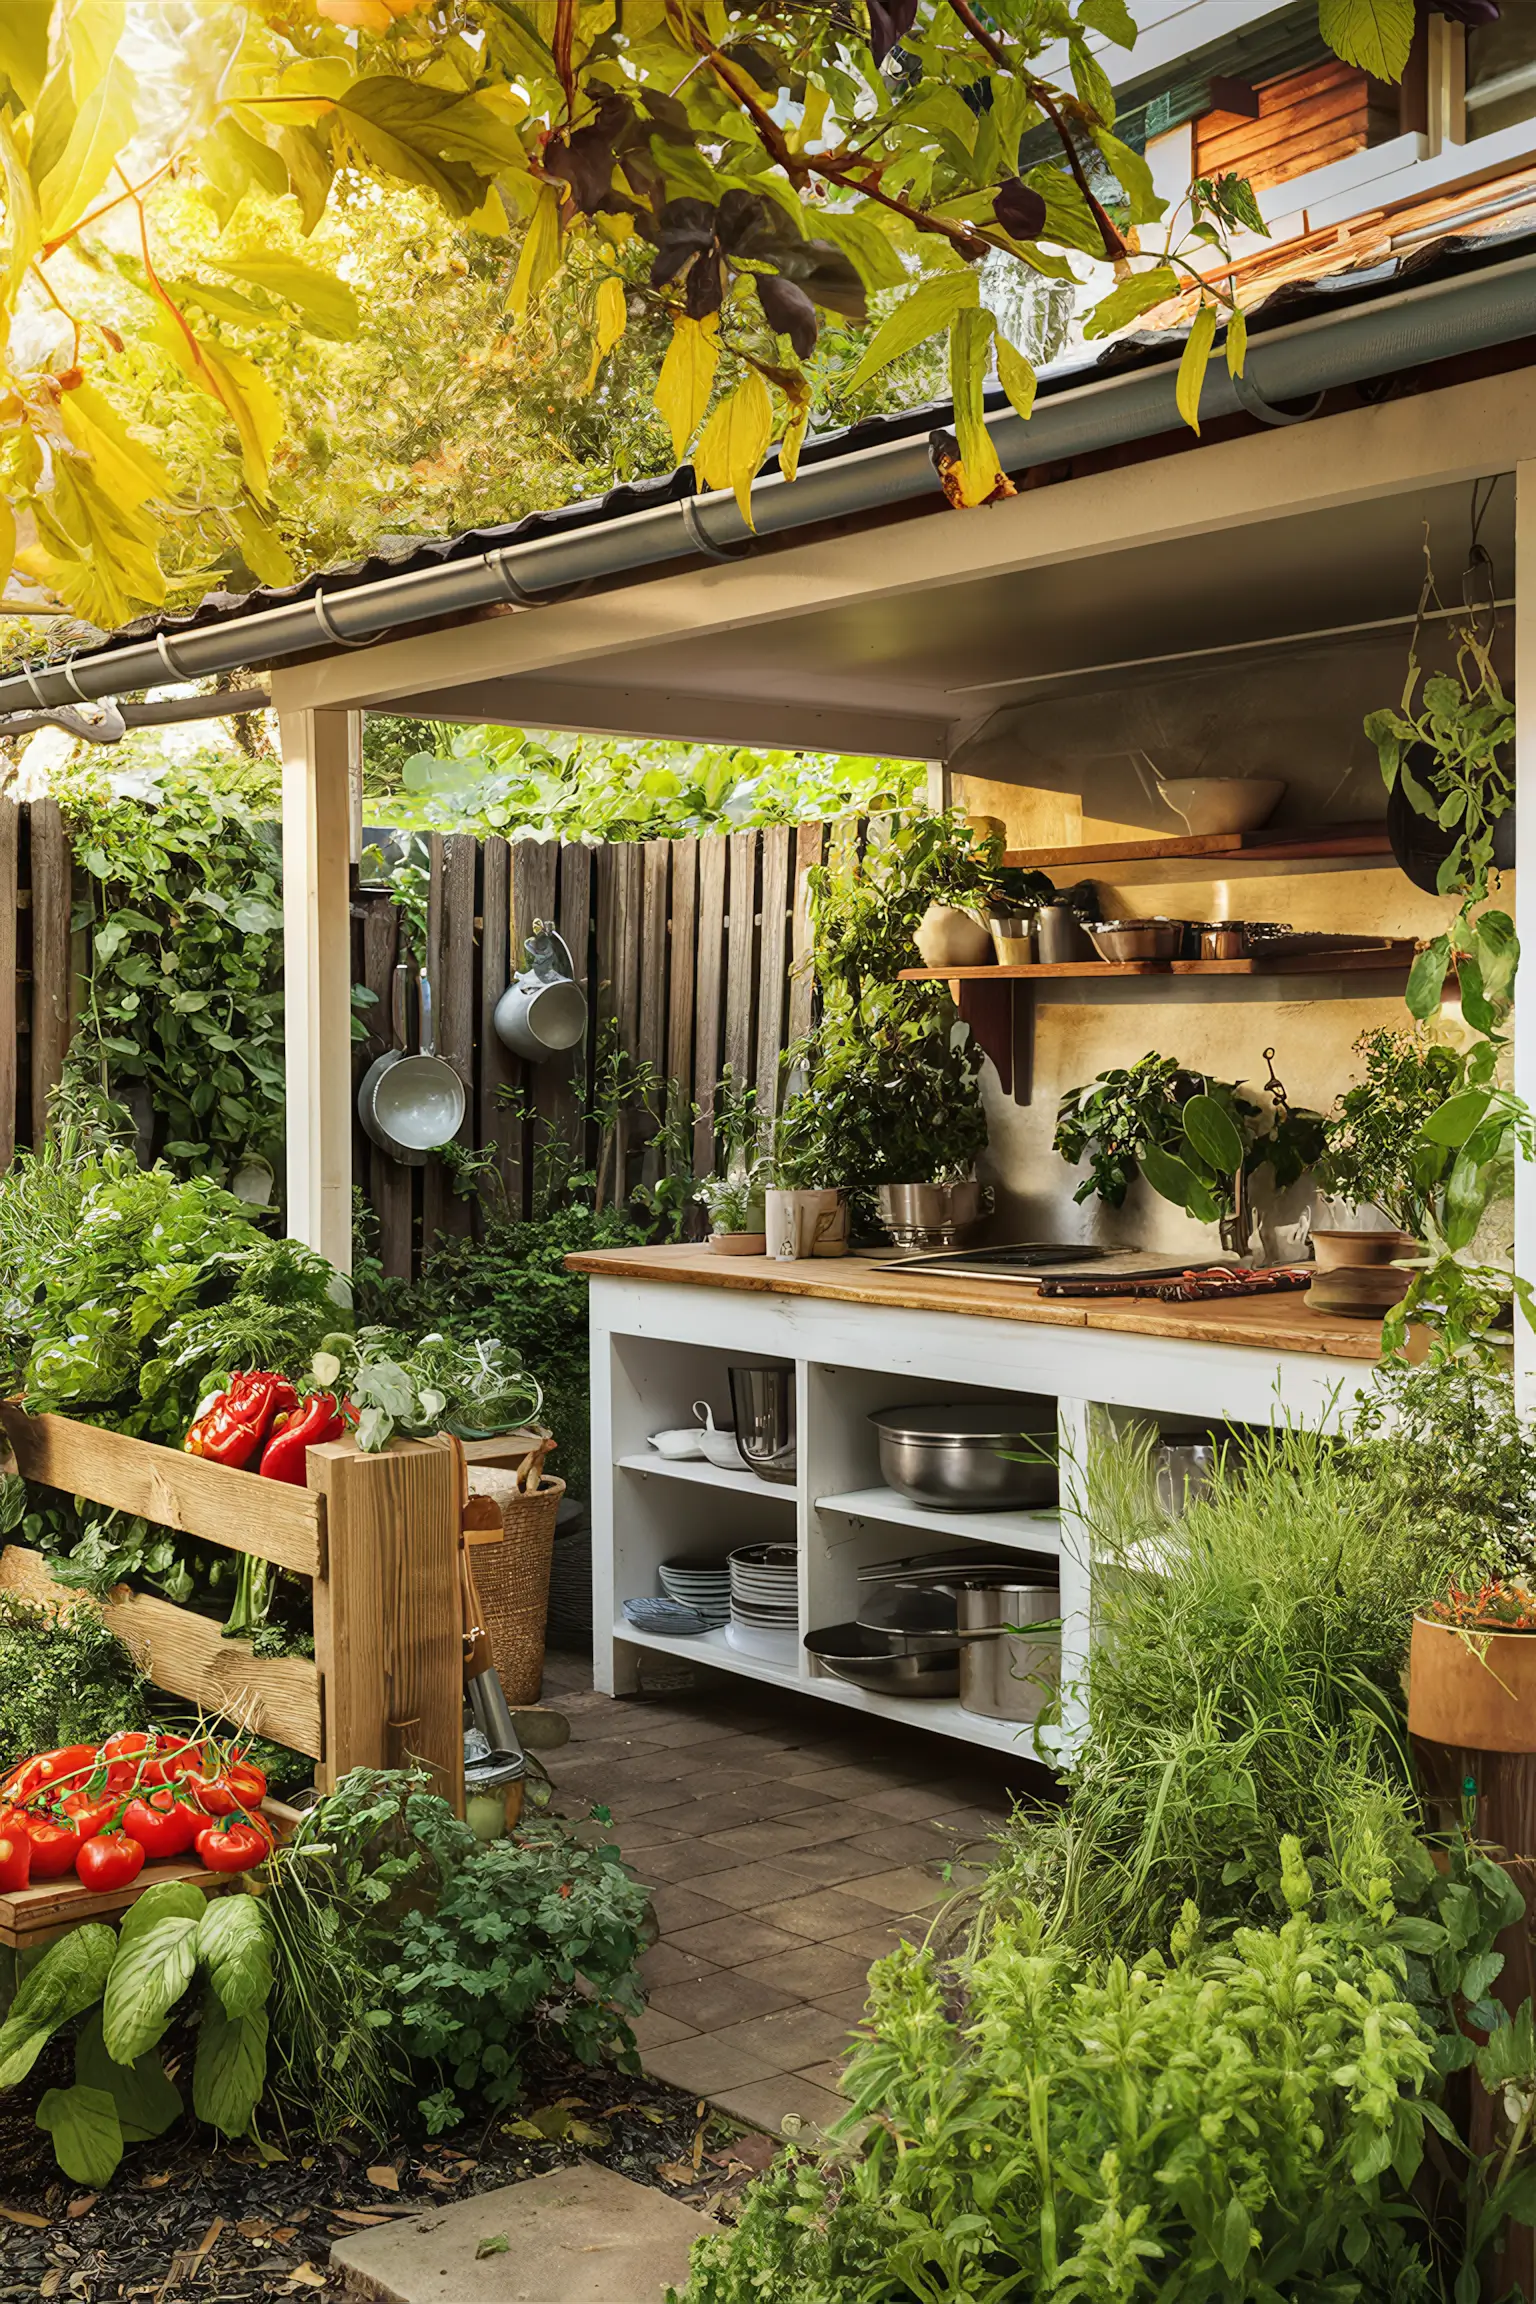 Backyard kitchen surrounded by vegetable and herb gardens.